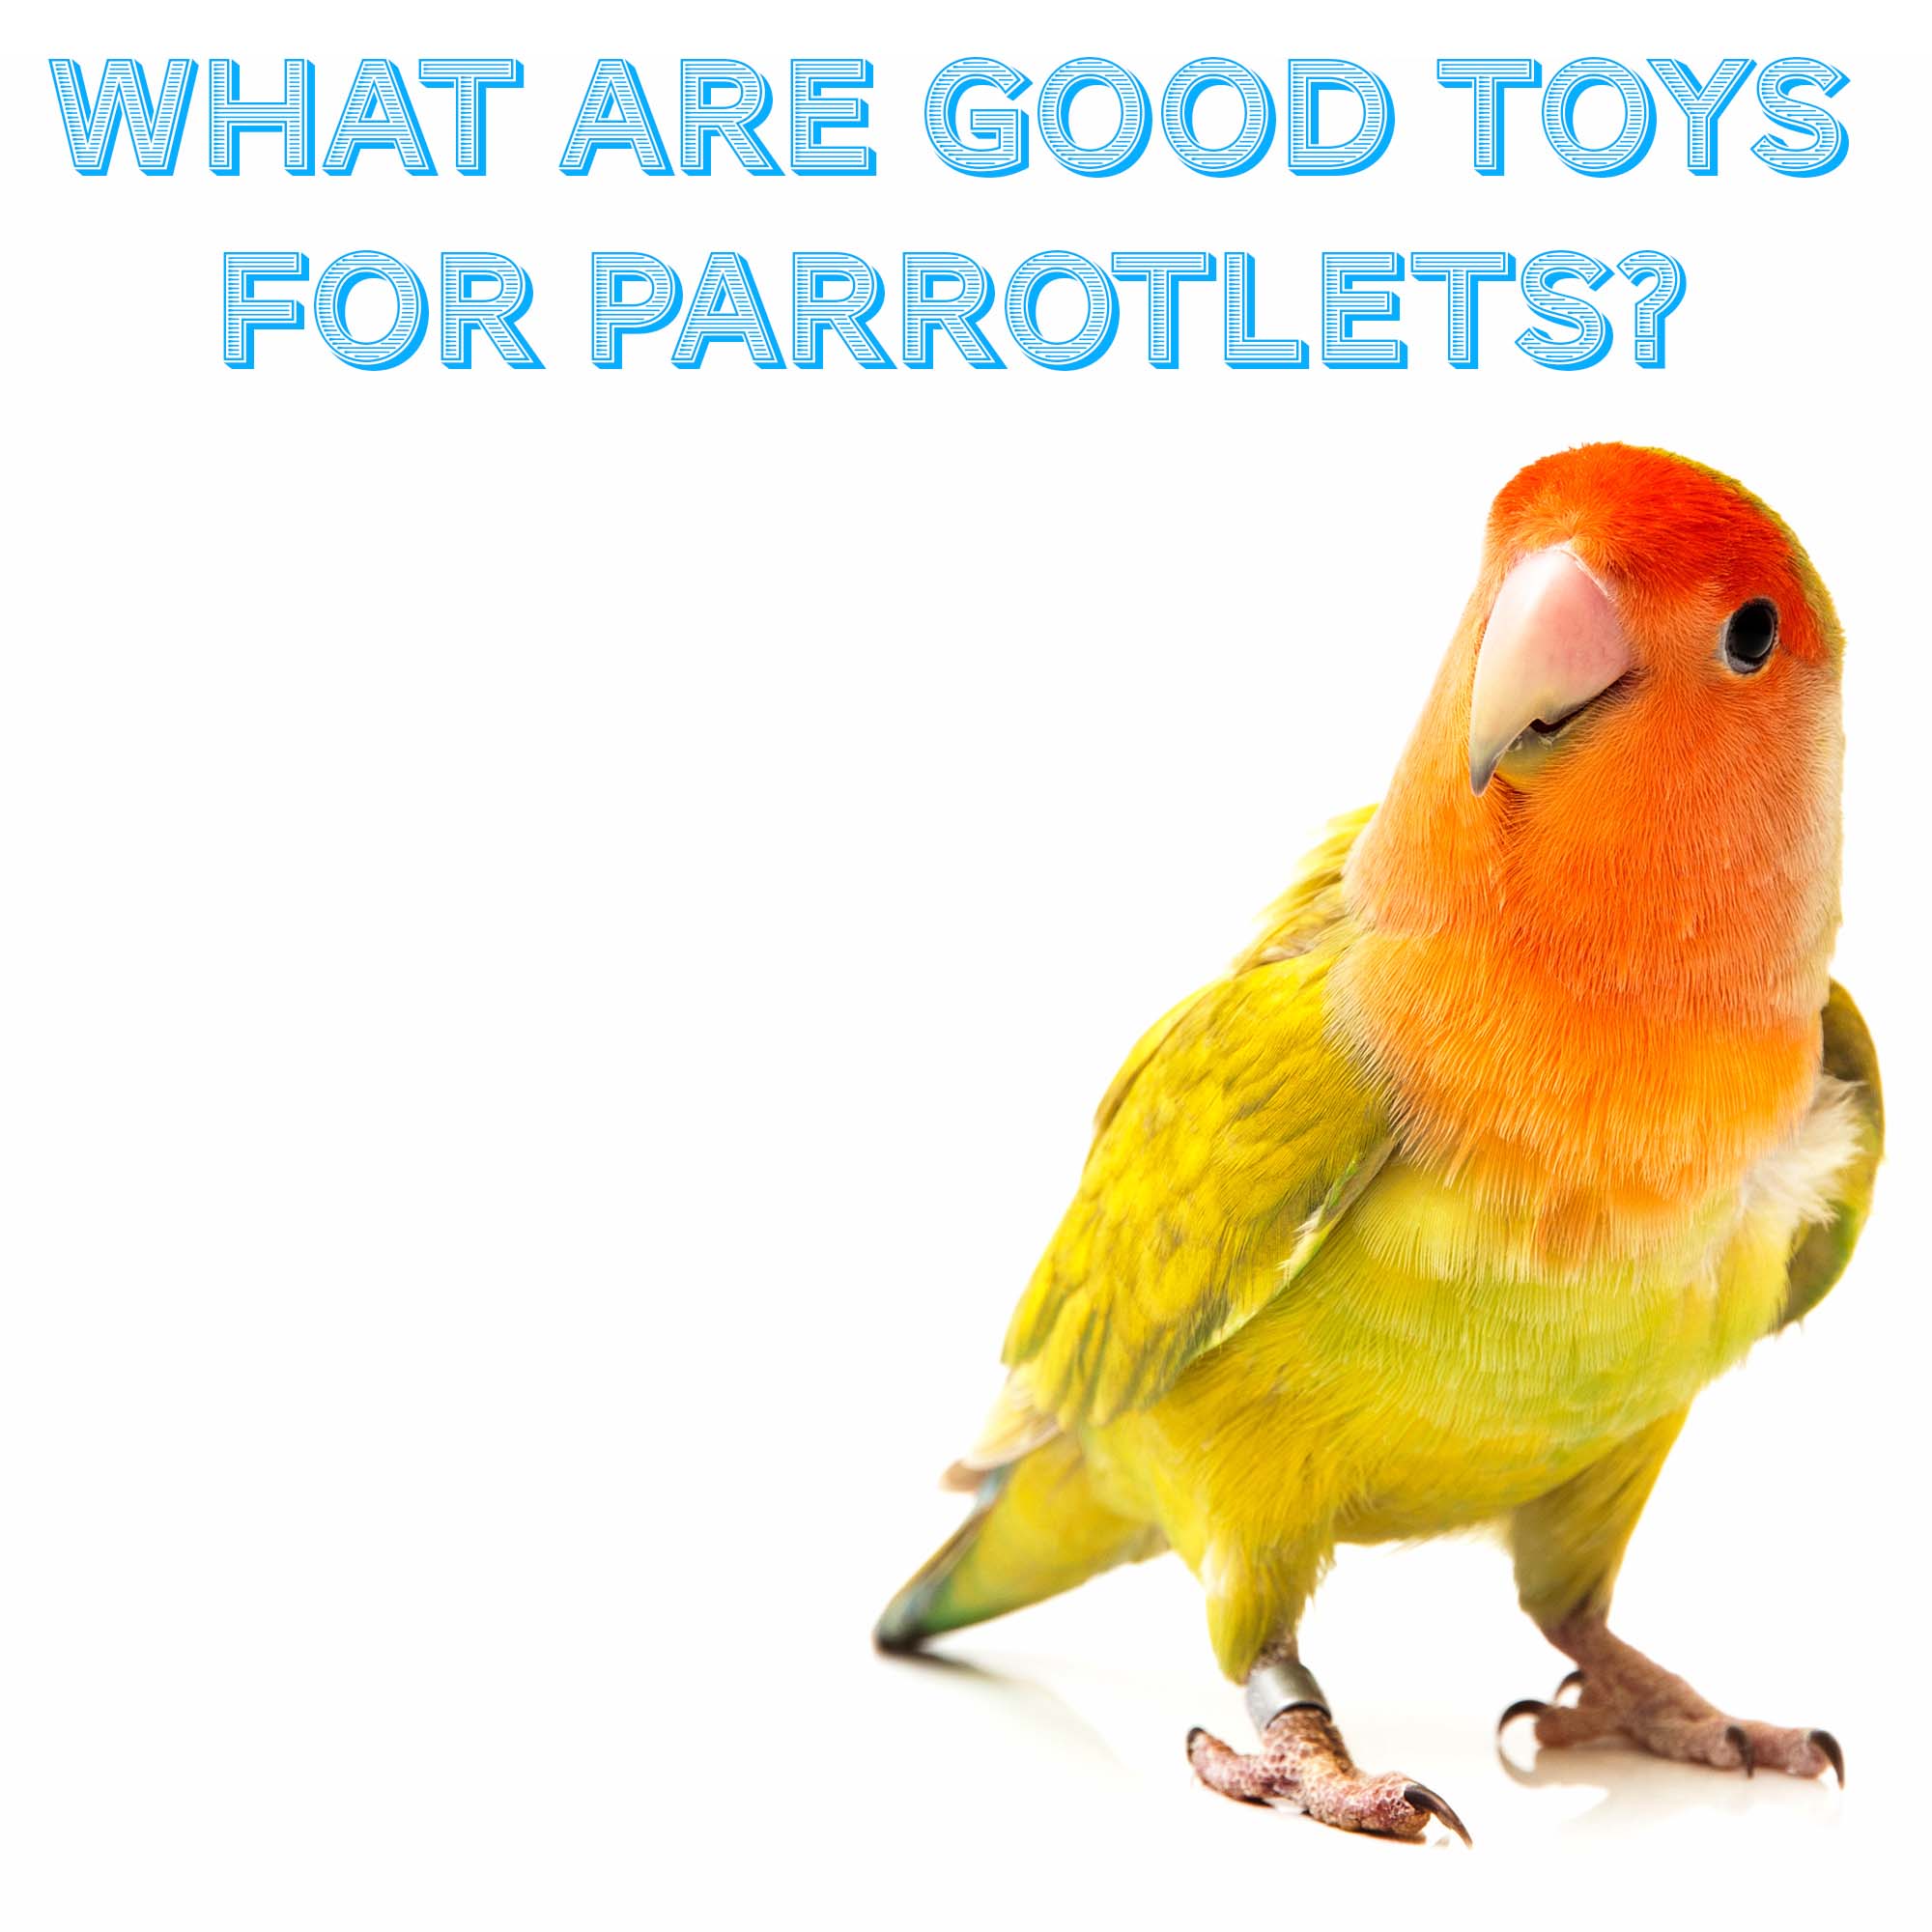 What are good toys for Parrotlets?